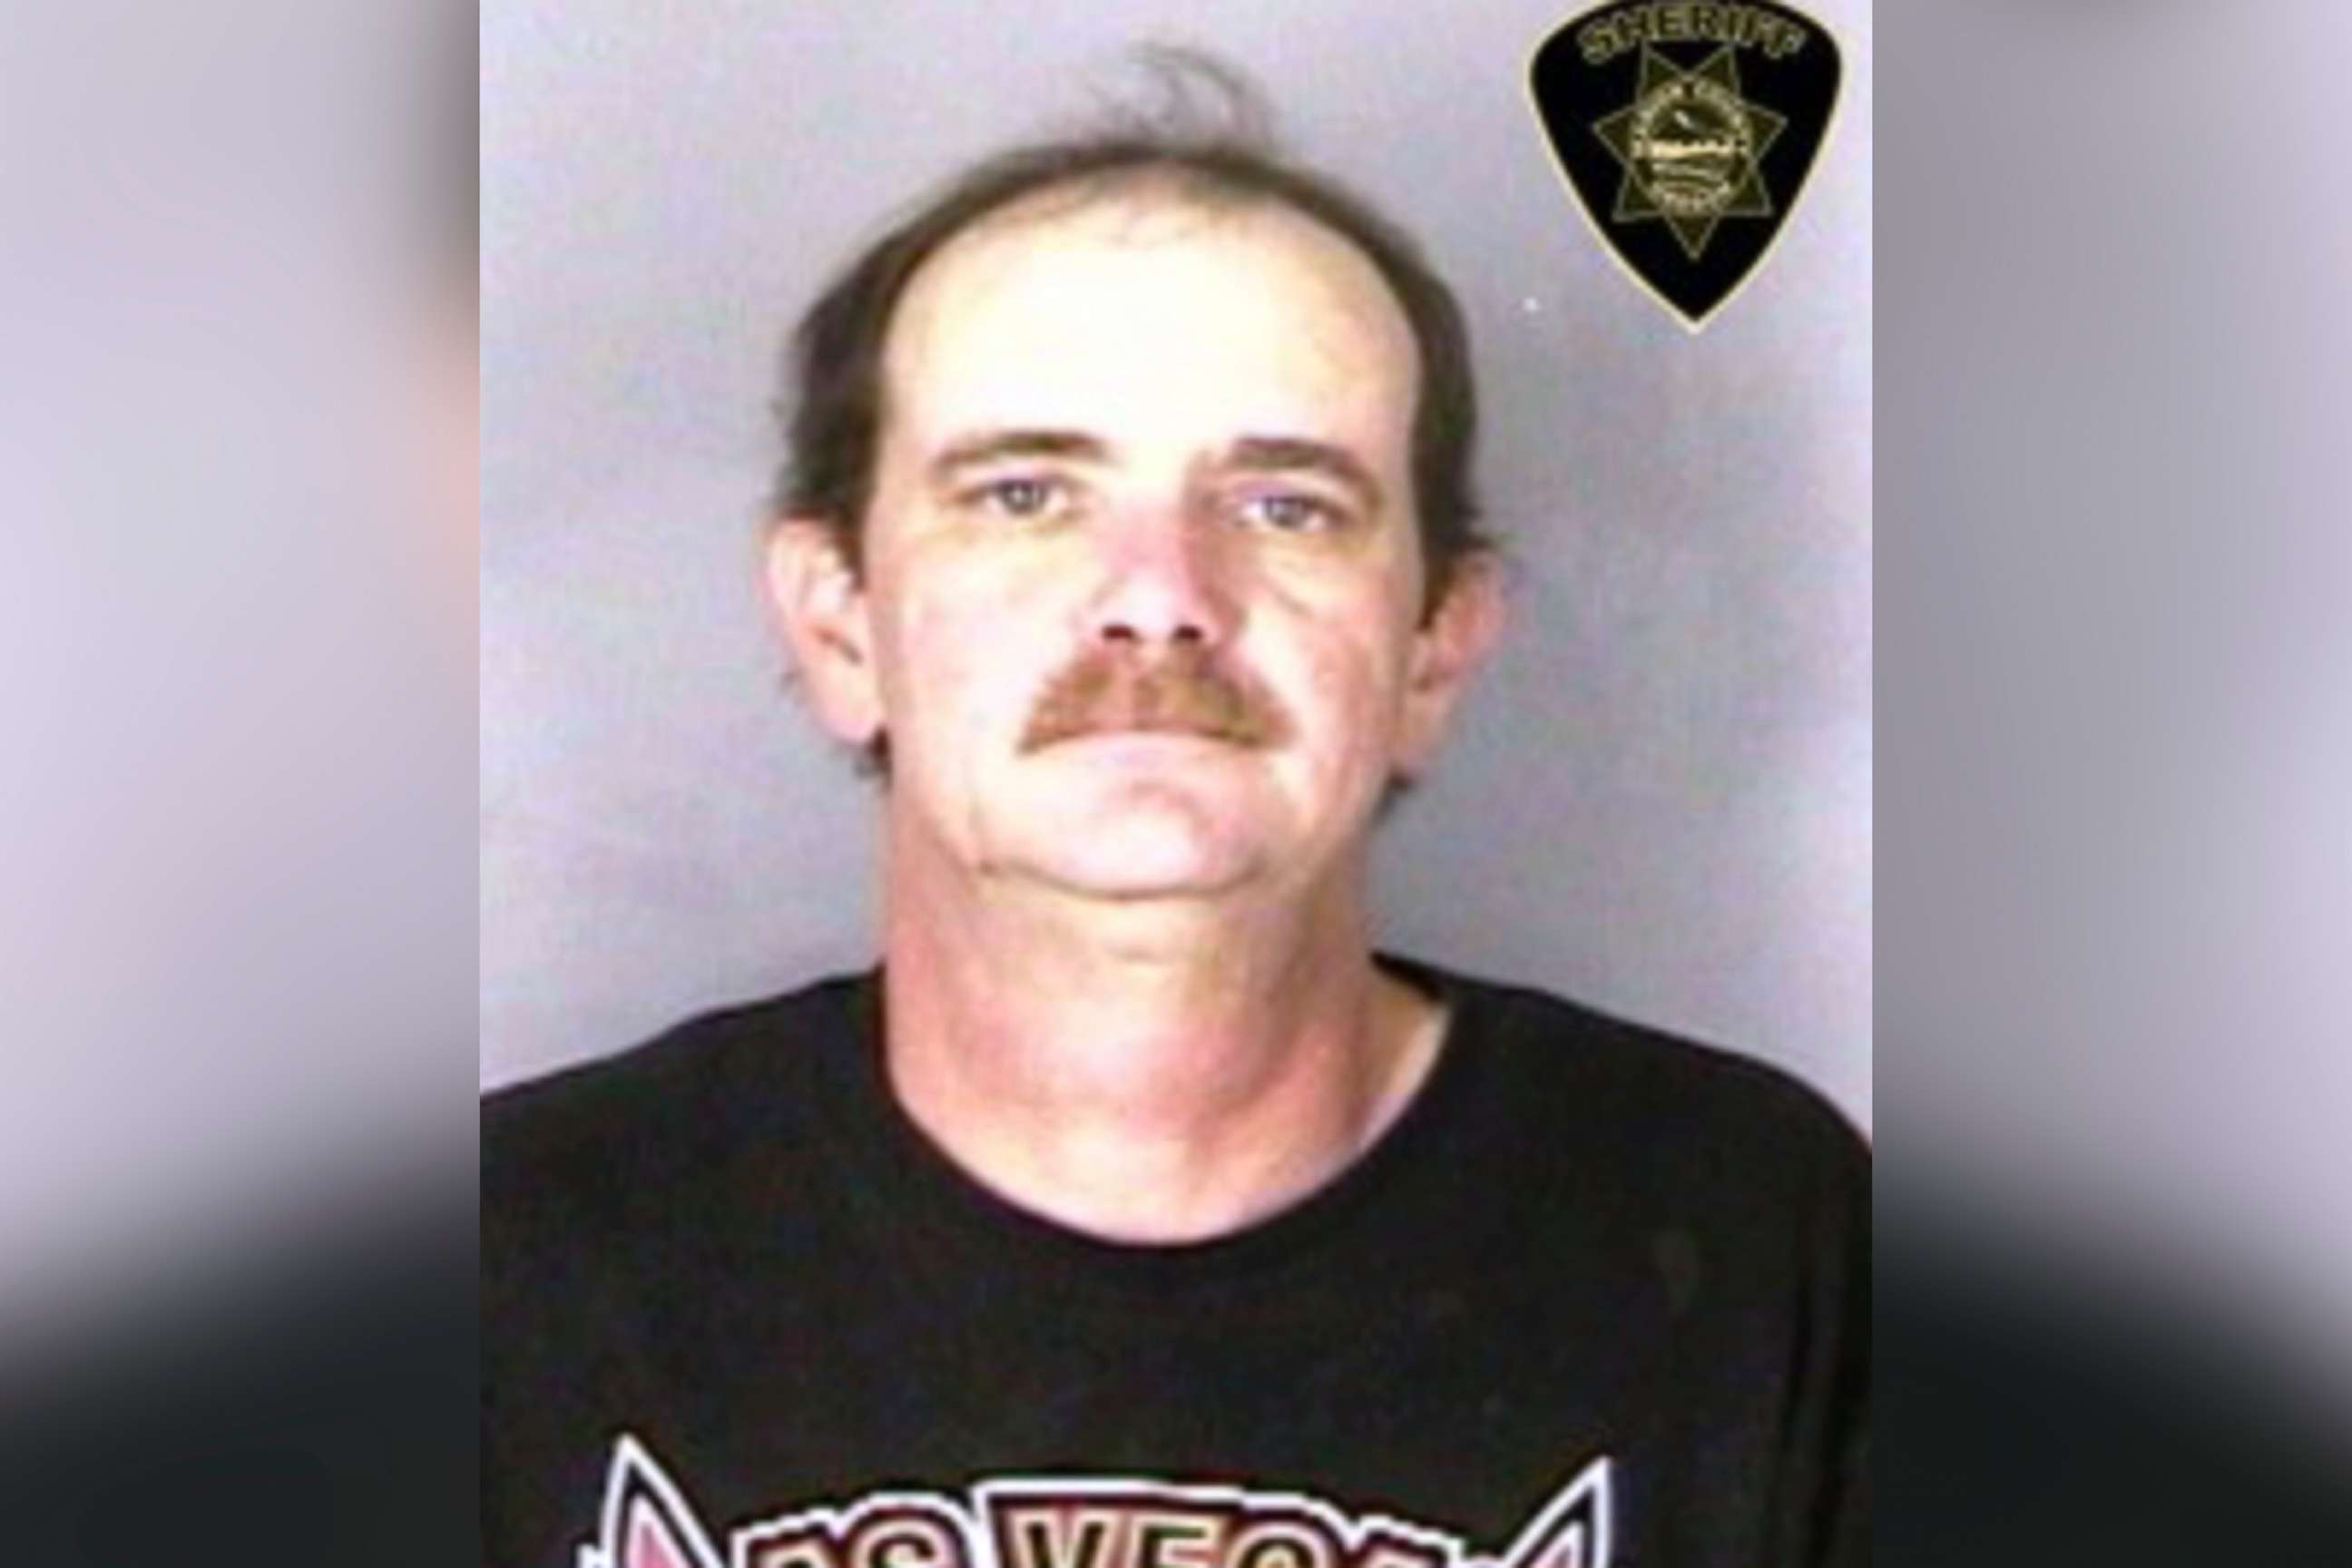 PHOTO: Stephen Houk is pictured in an undated photo released by the Marion County Sheriff's Department in Oregon.